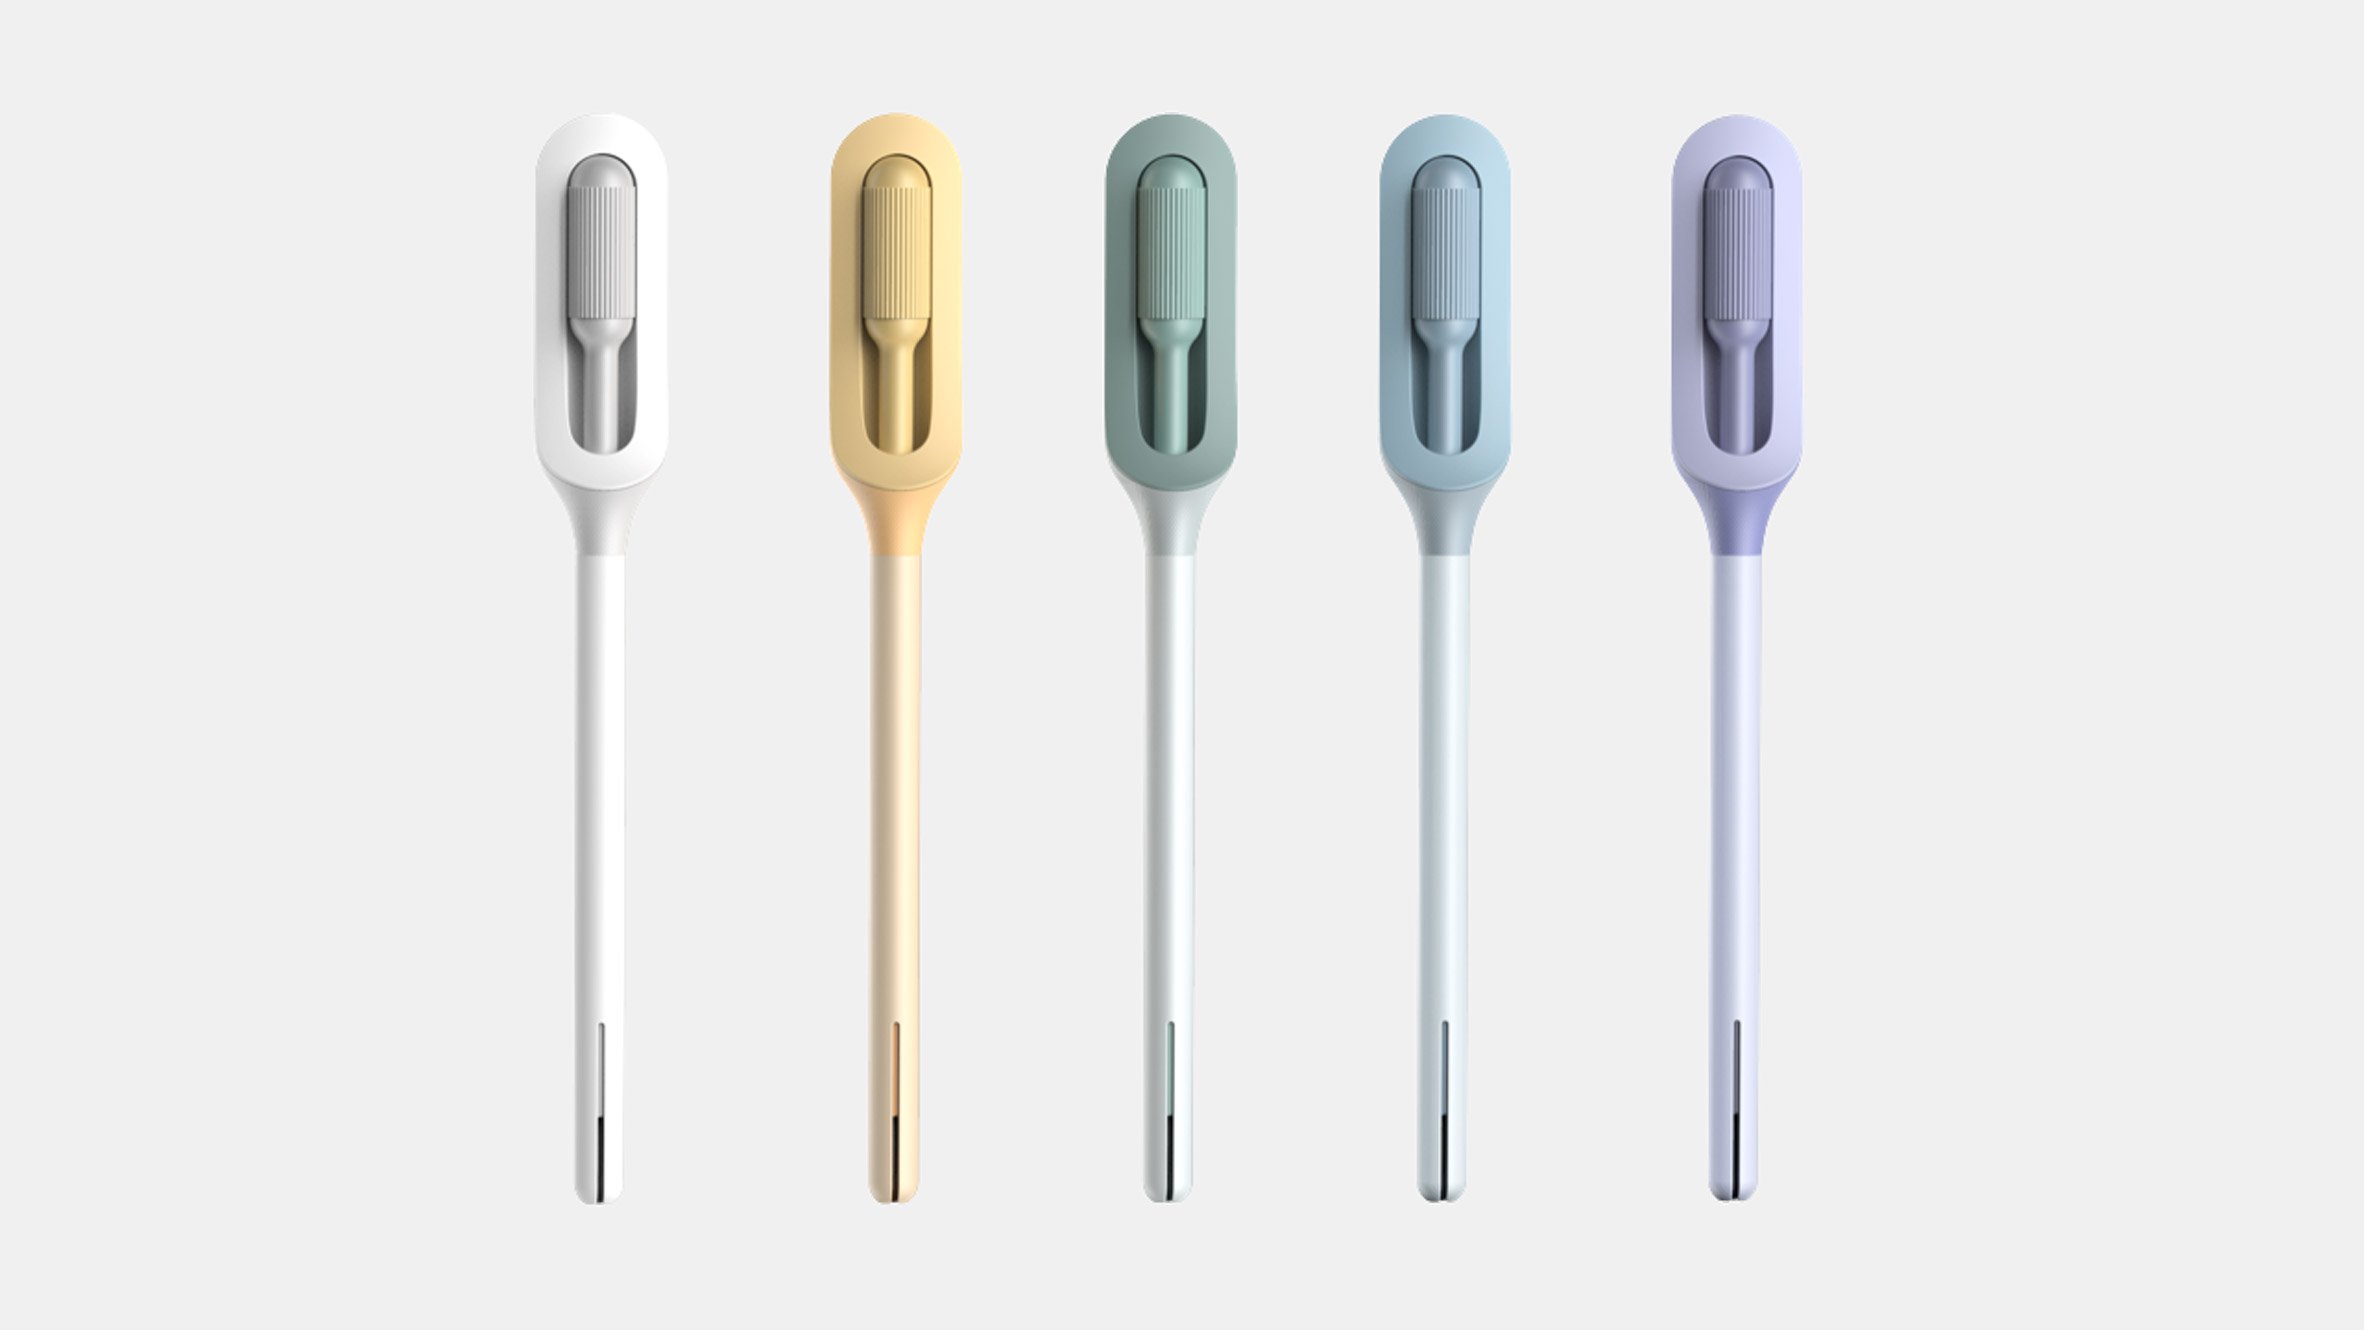 Early prototype designs of Teal Wand for Teal Health by IDEO